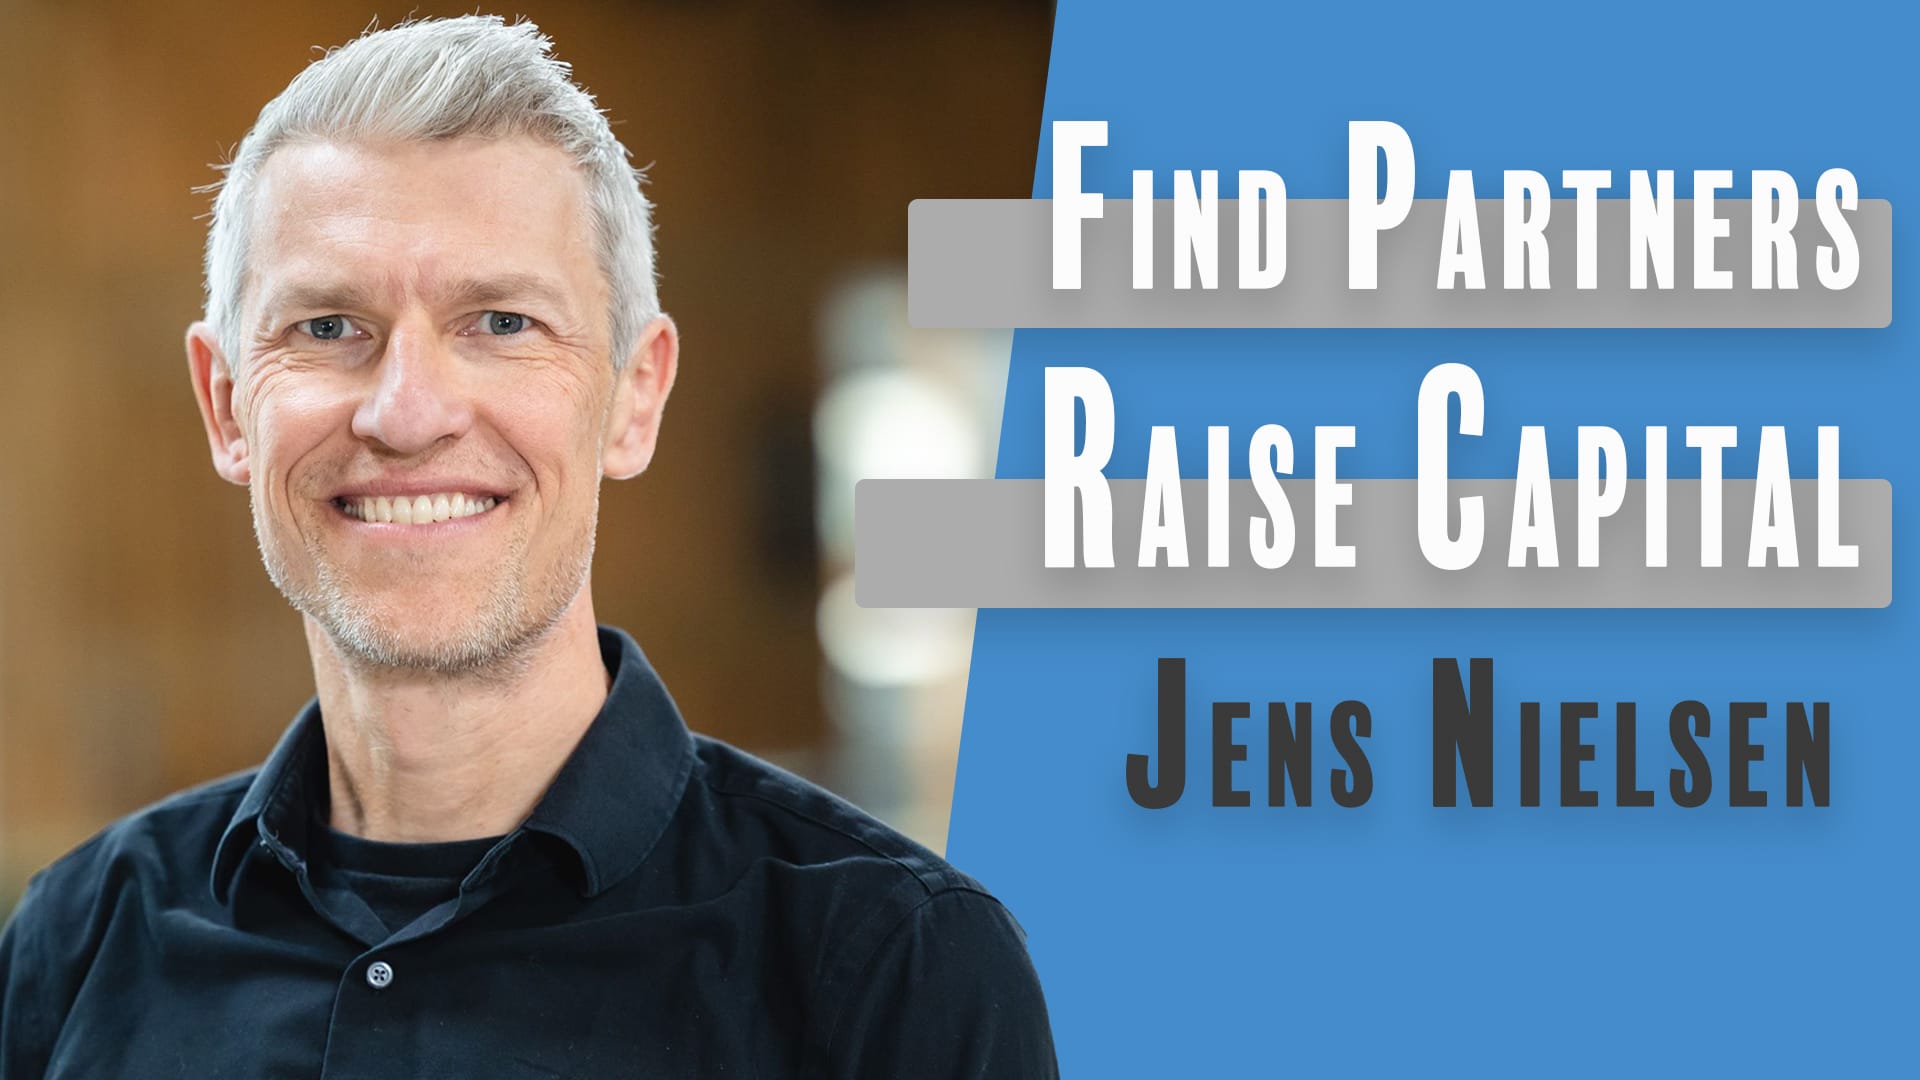 How to Find Partners and Raise Capital with Jens Nielsen